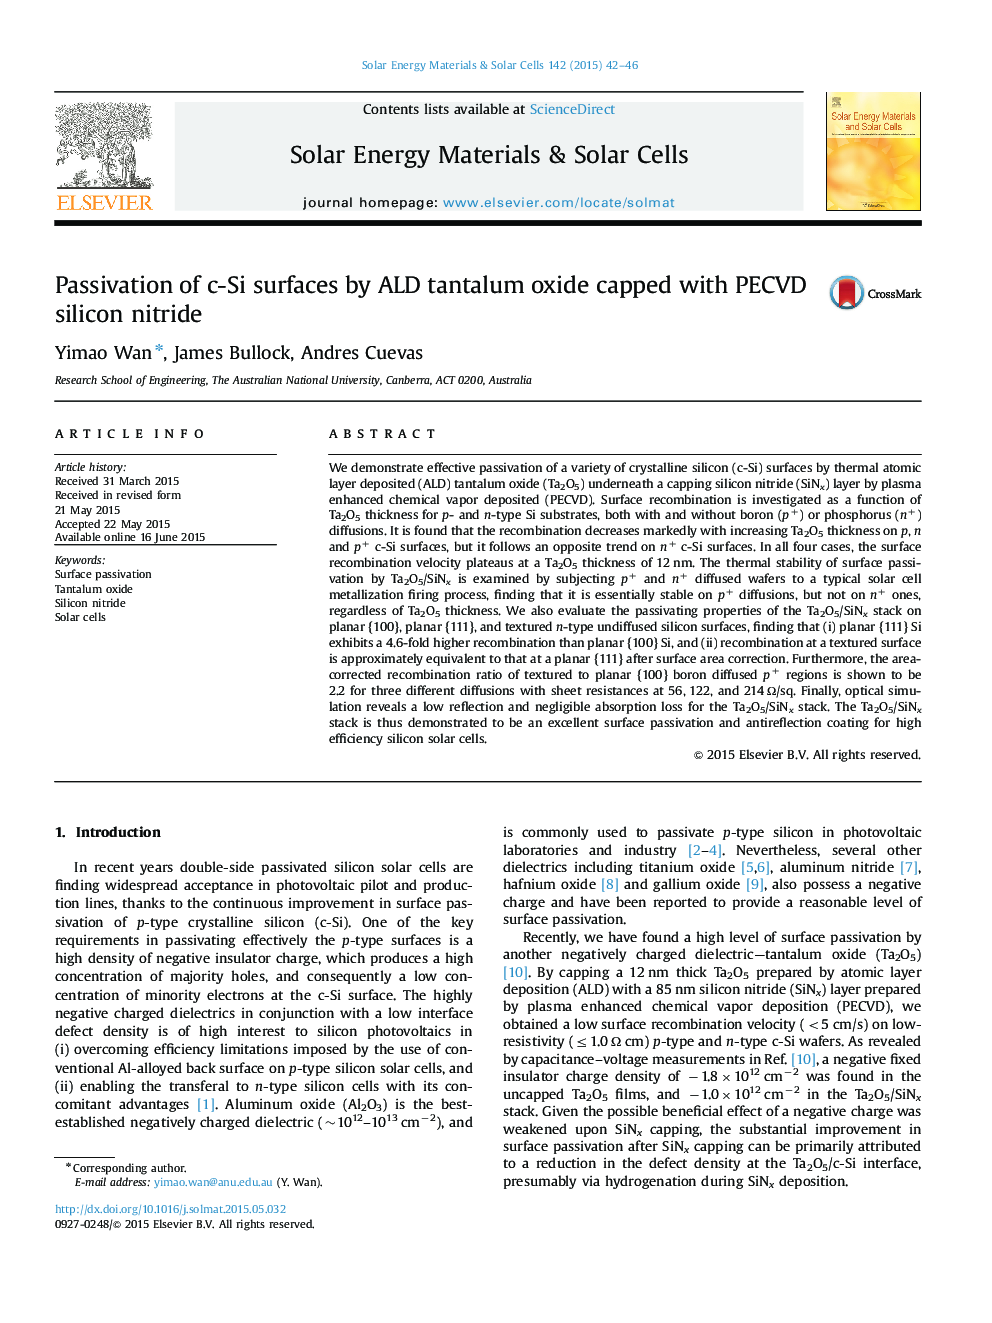 Passivation of c-Si surfaces by ALD tantalum oxide capped with PECVD silicon nitride